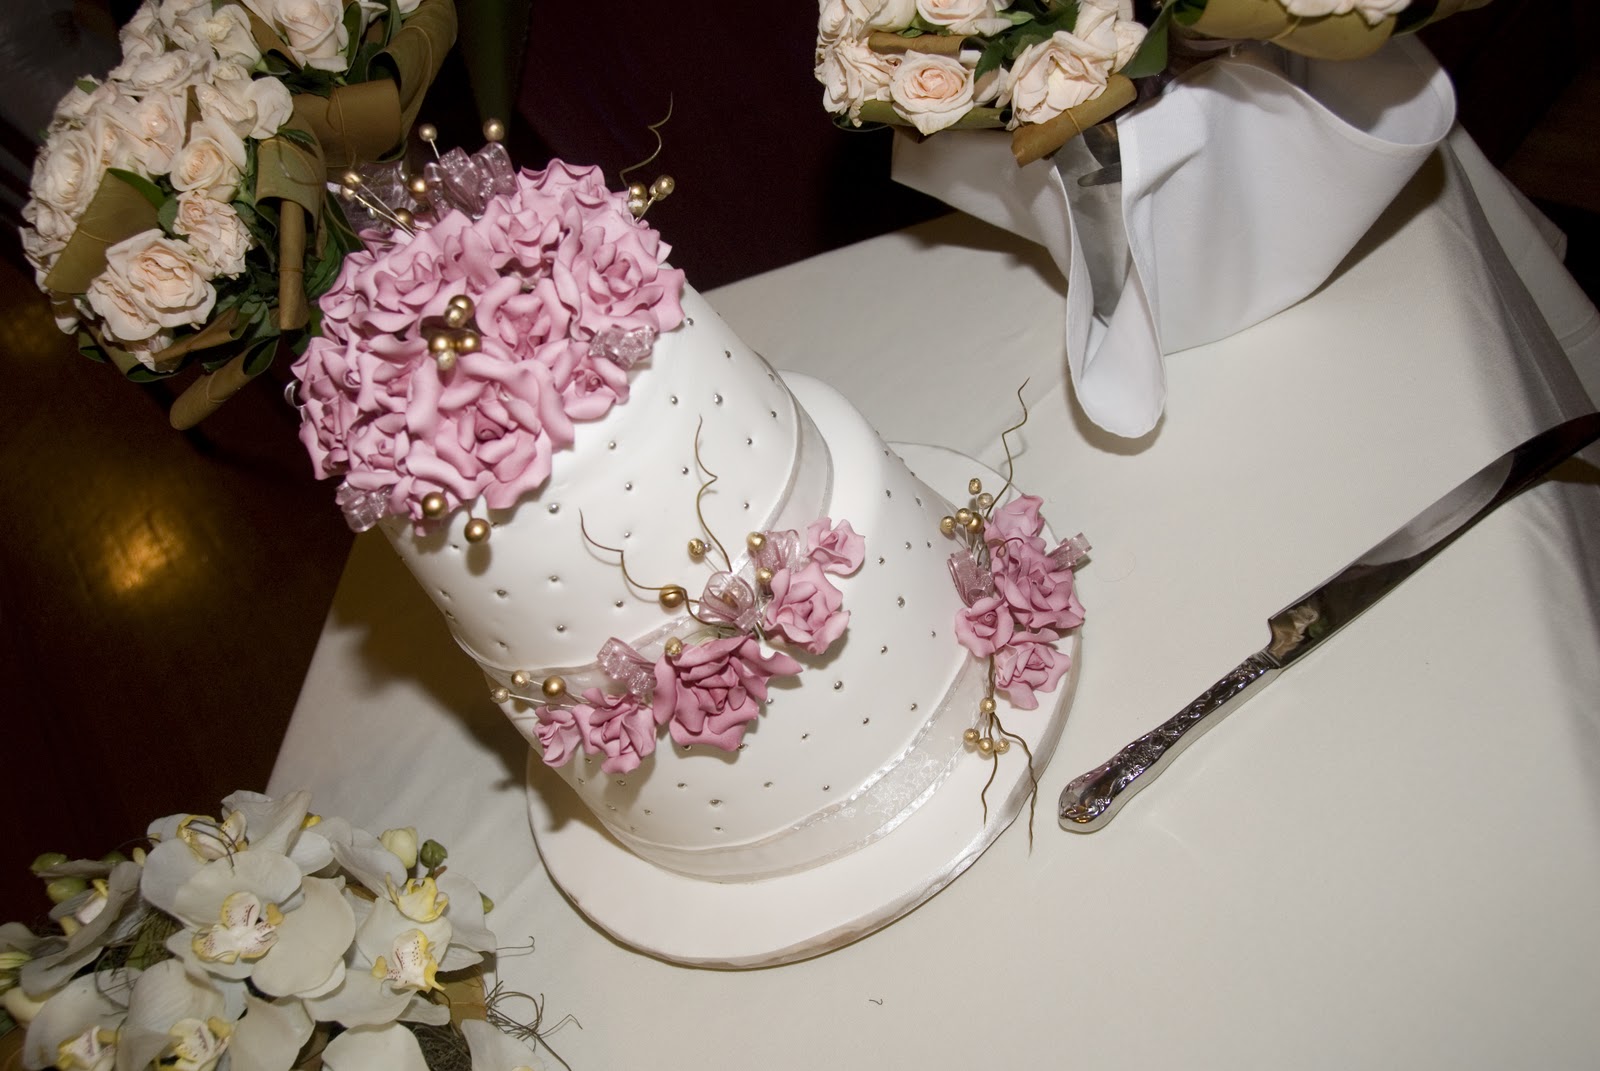 silver wedding cake stands  for wedding cakes just a simple 2 tier wedding cake was going to